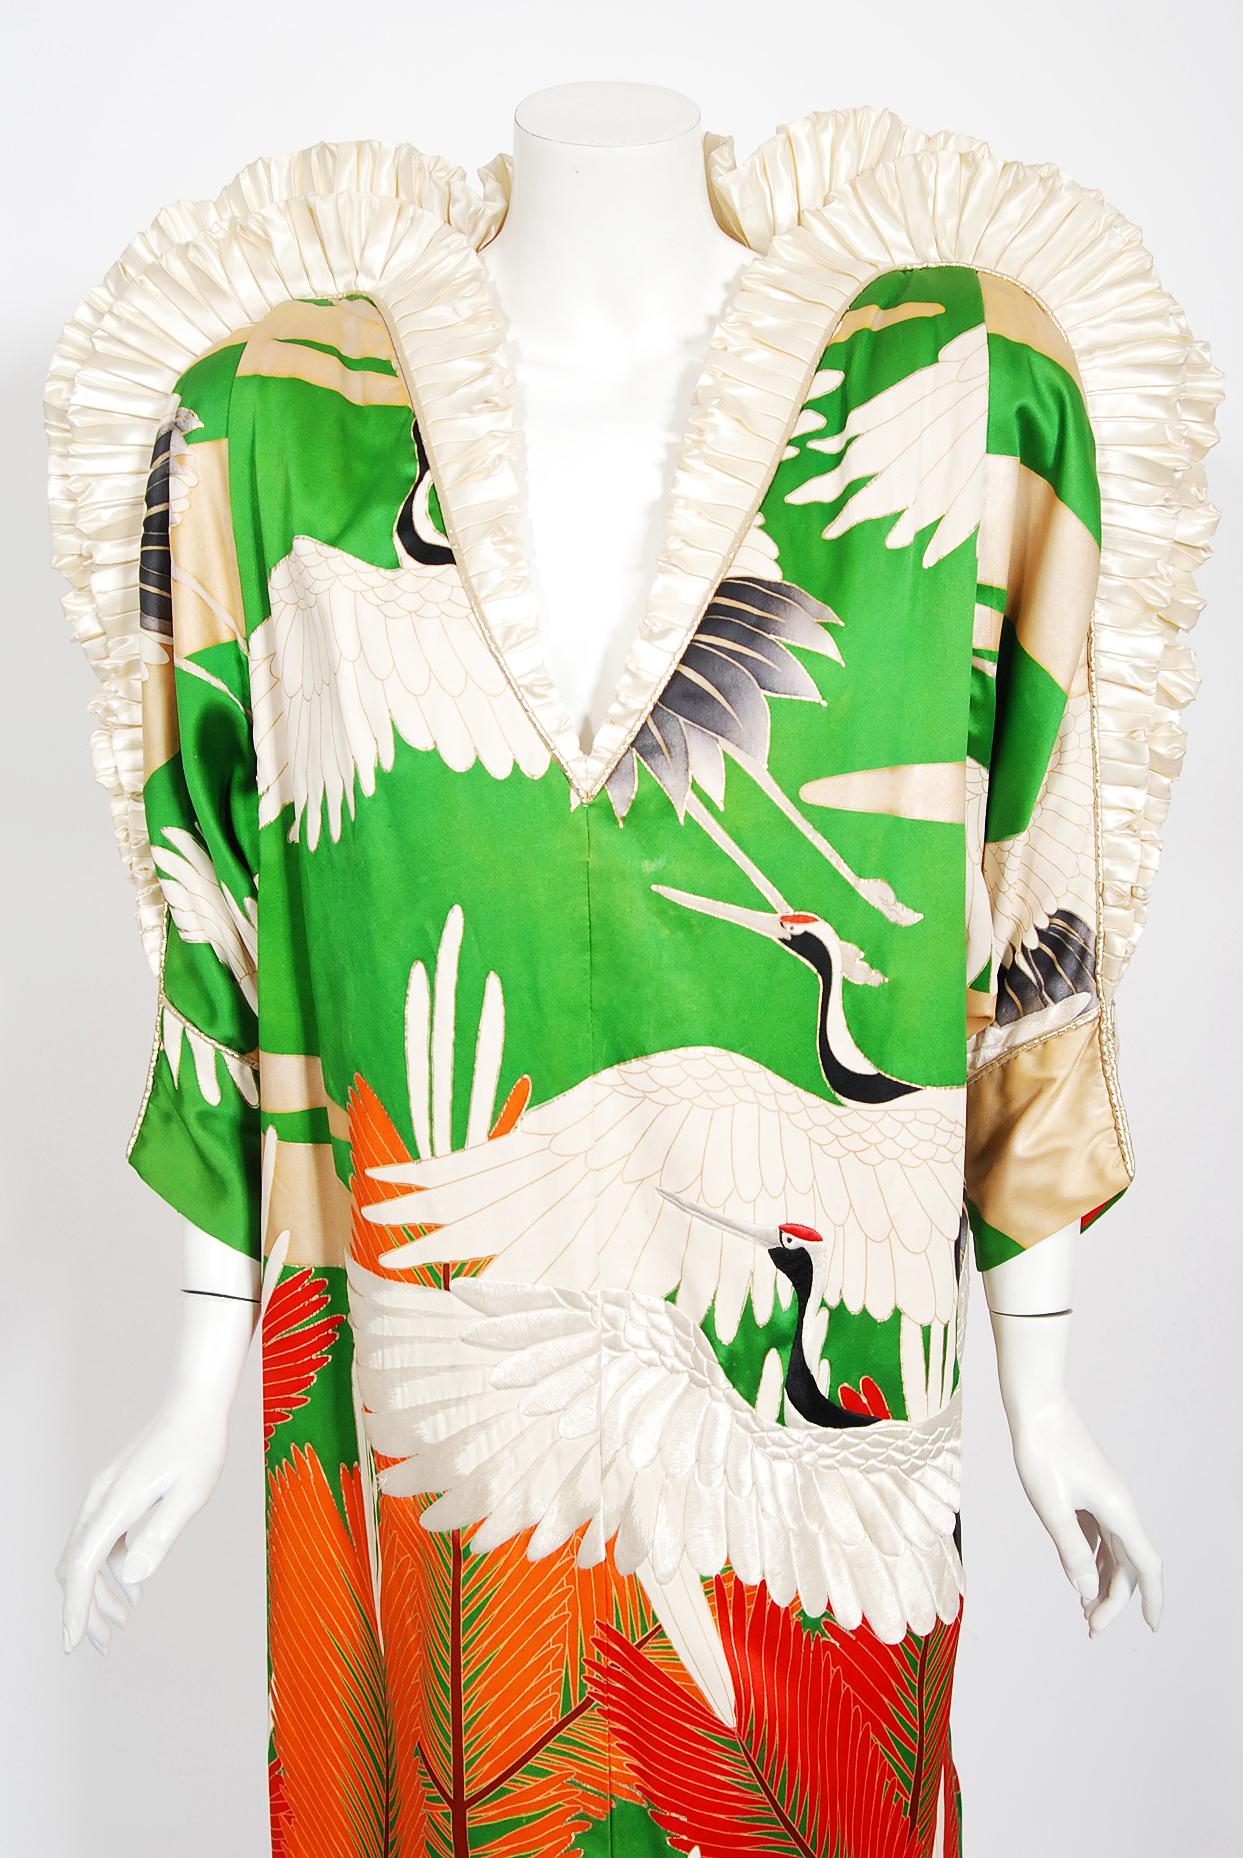 Sensational and incredibly whimsical Leslie Jean Goldberg designer avant-garde novelty crane bird dress dating back to the early 1980's. Leslie Jean Goldberg was a New York artist who sold unique clothing and jewerly that truly told a story. Though